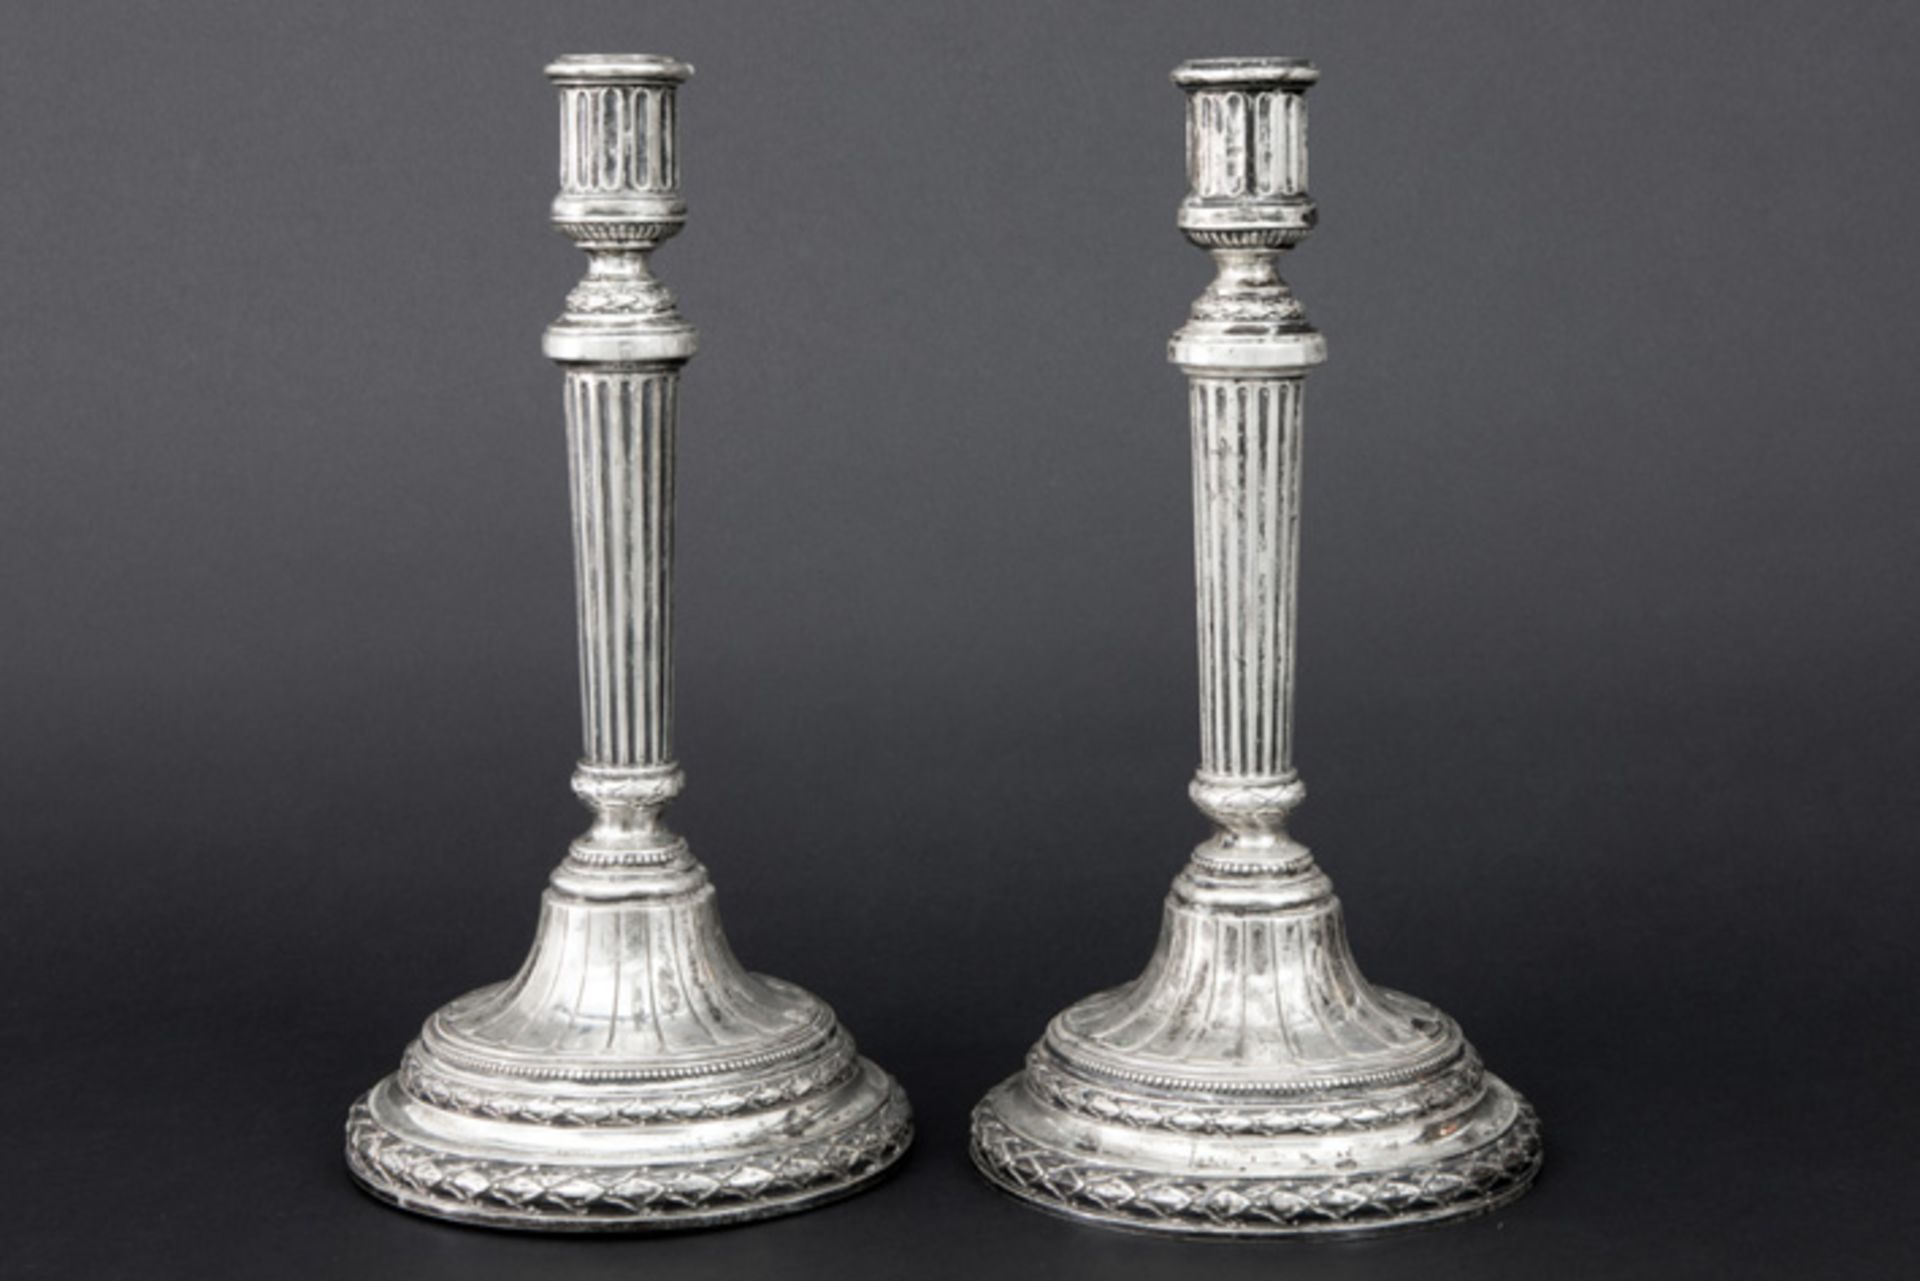 pair of antique Dutch neoclassical candlesticks in marked and "J.A.Hoeting" signed silver||J.A.